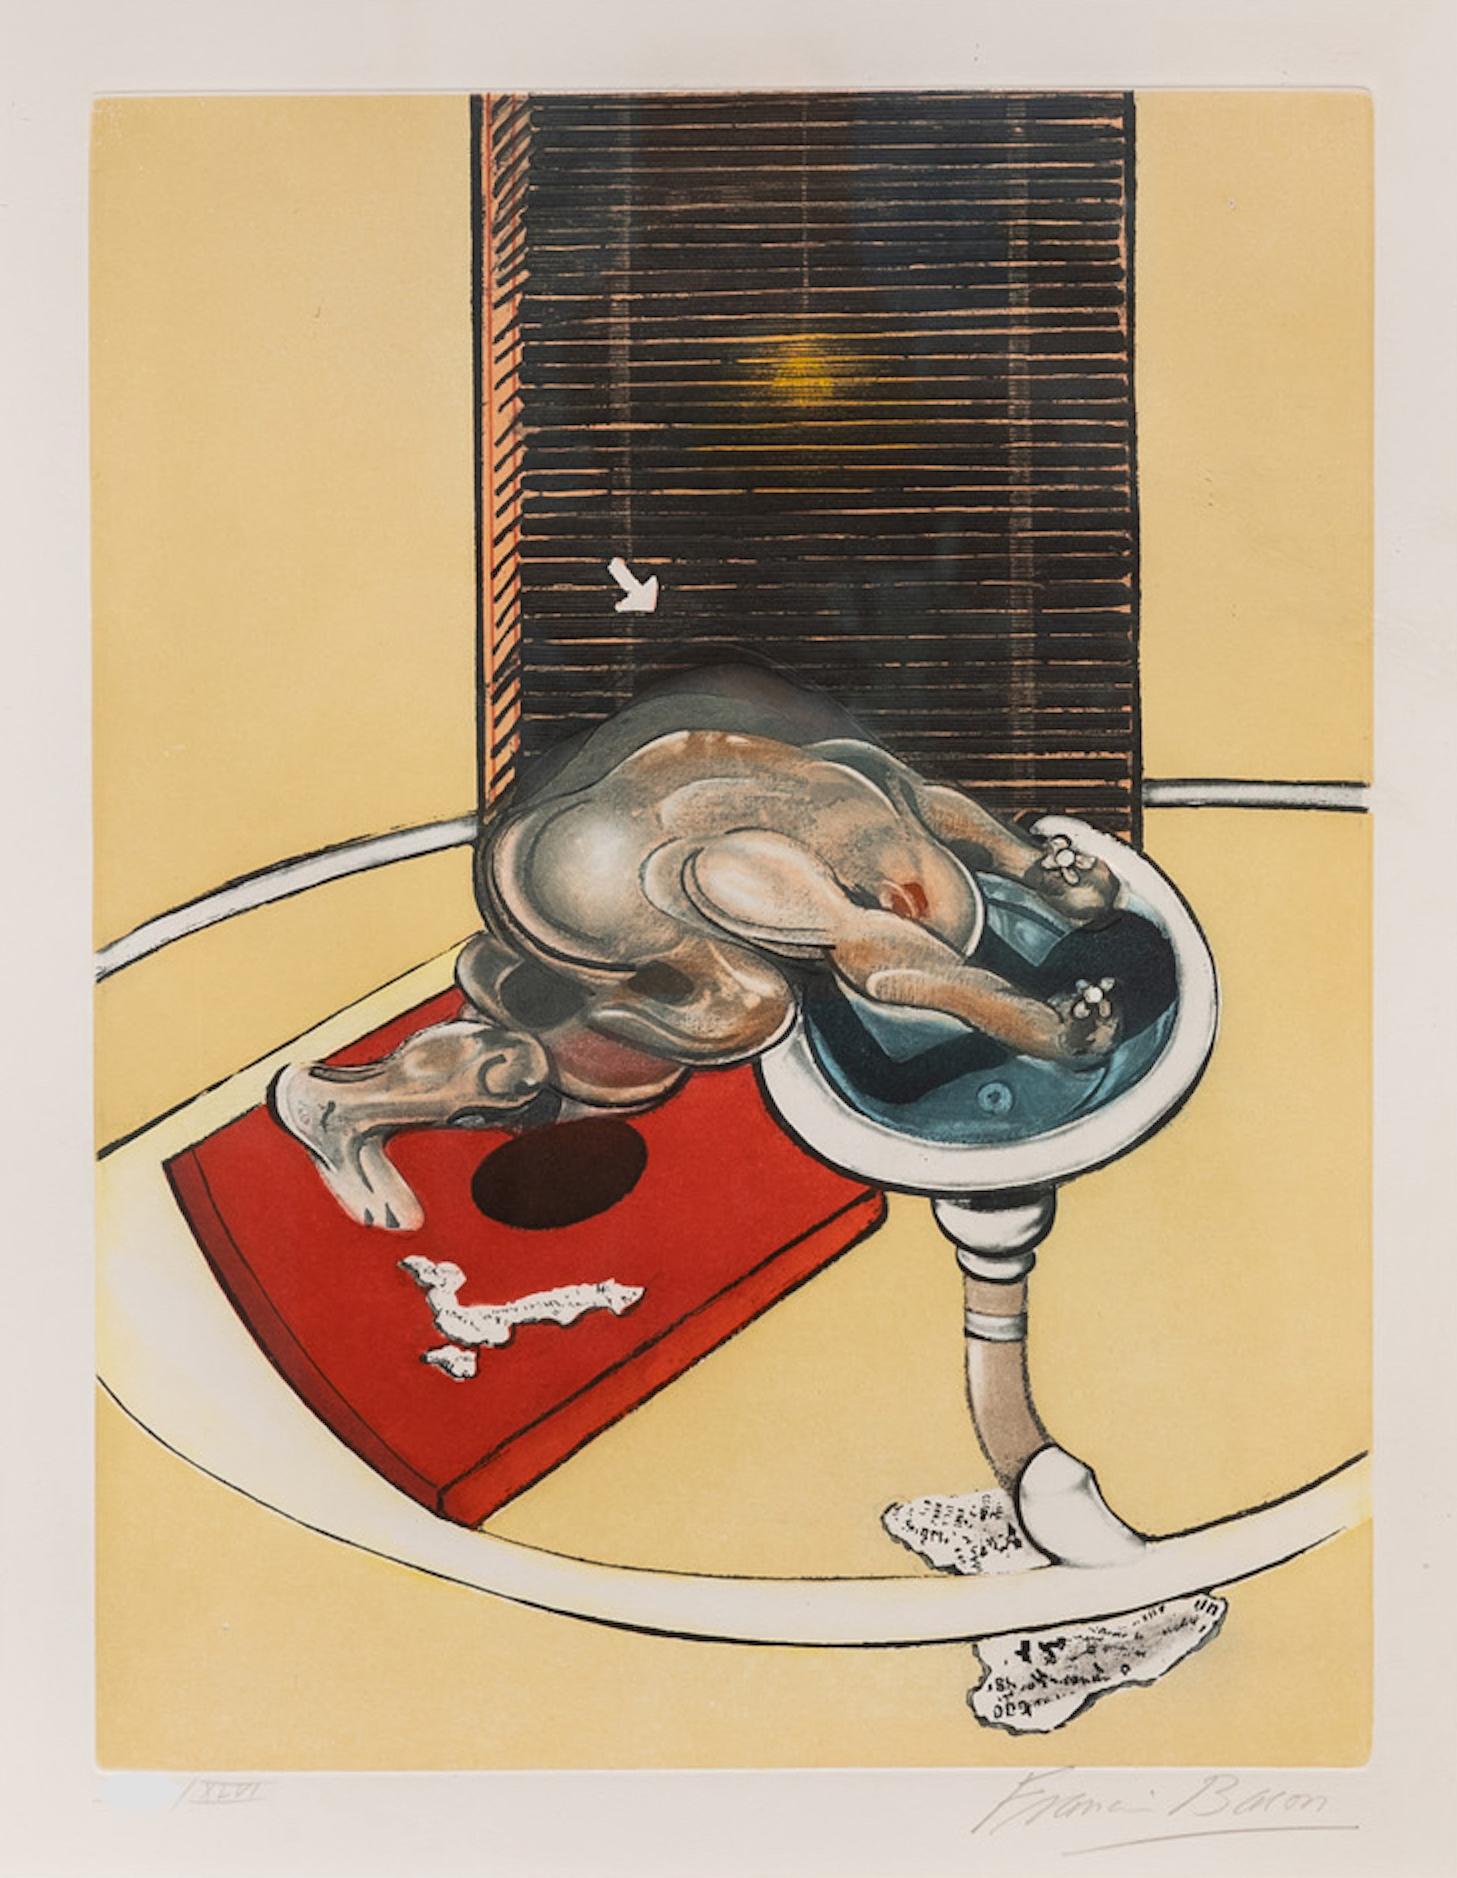 l'Homme au lavabo [Figure at a Washbasin] - Print by Francis Bacon